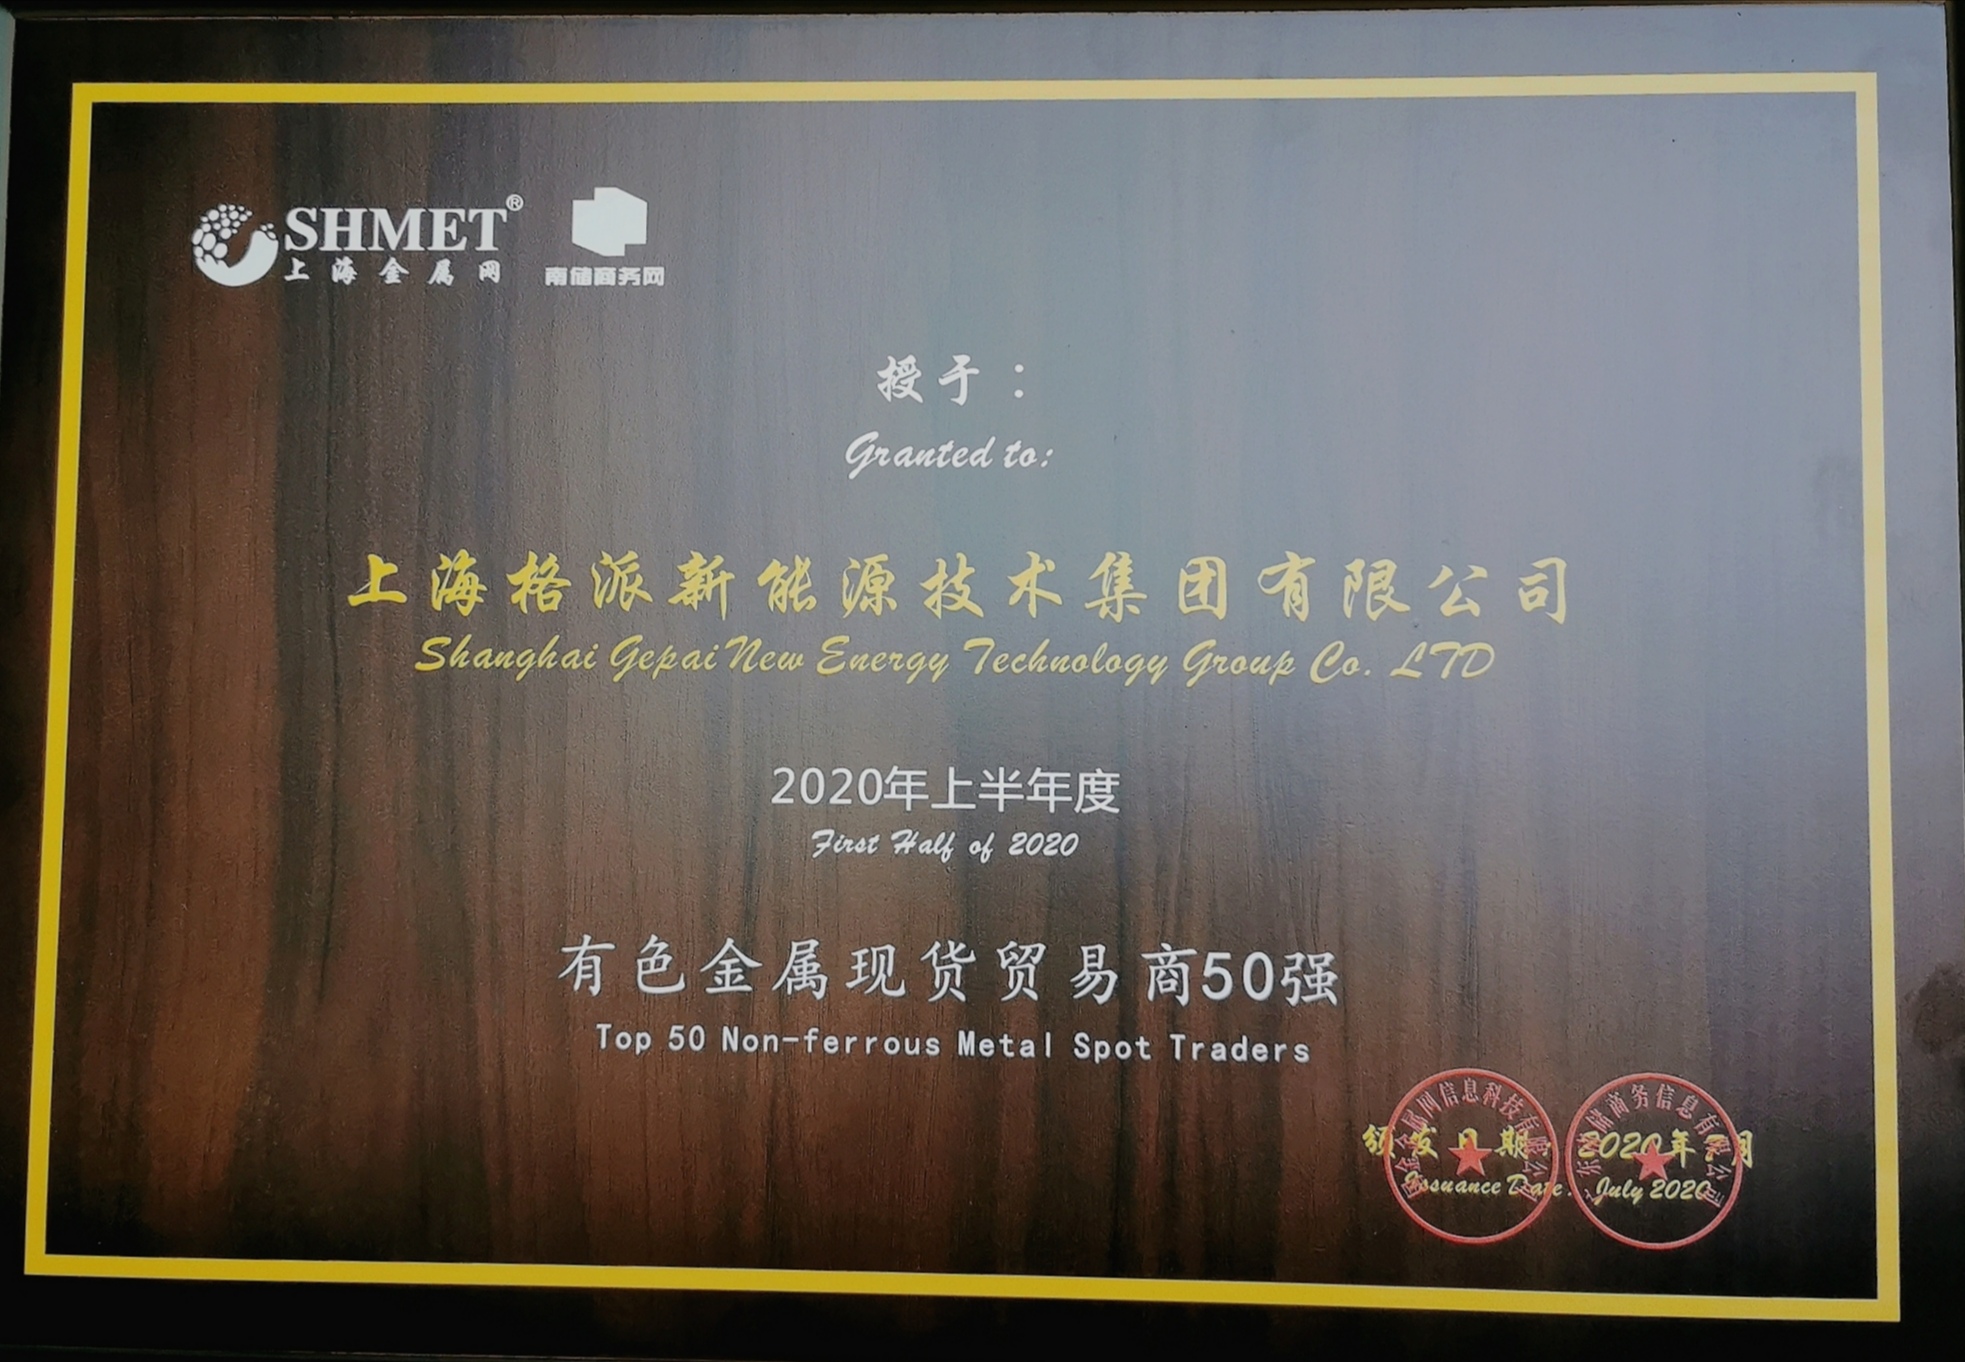 Greatpower was rated as one of the top 50 non-ferrous metal spot traders in China